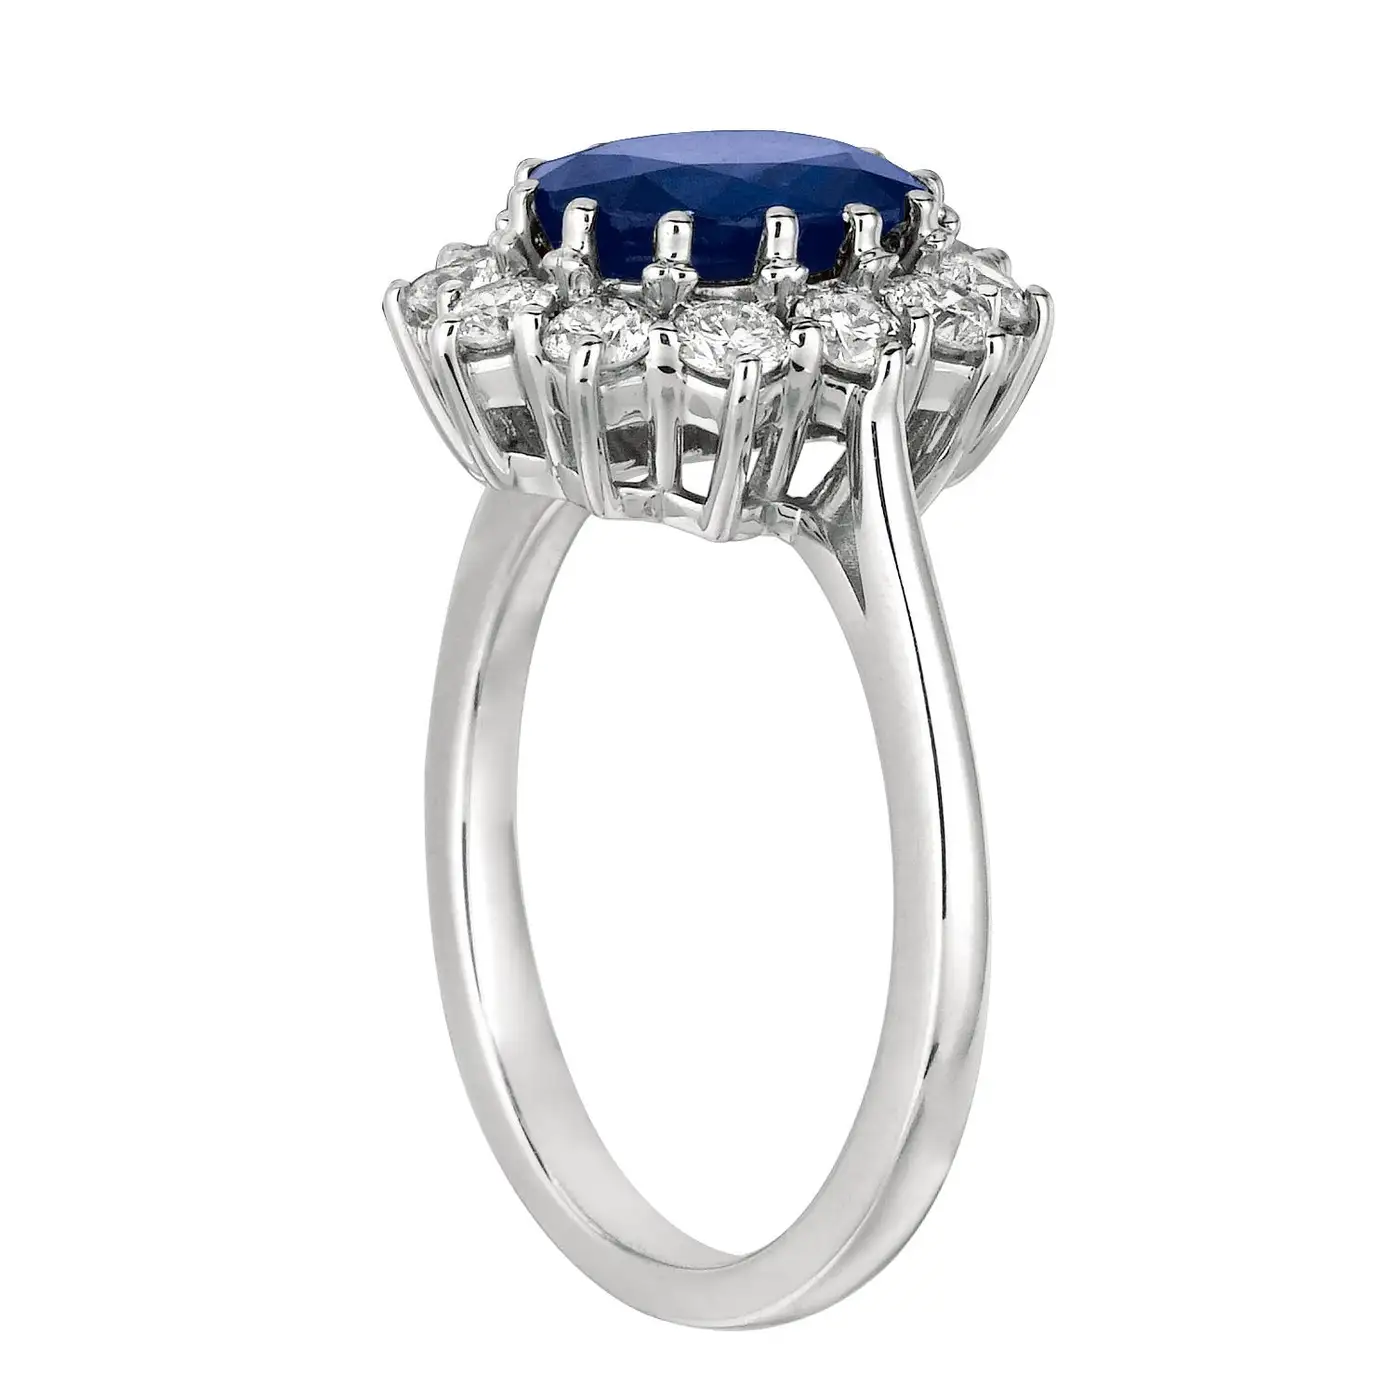 Princess-Diana-Inspired-3.55-Carat-Oval-Sapphire-and-Diamond-Ring-14K-White-Gold-3.webp